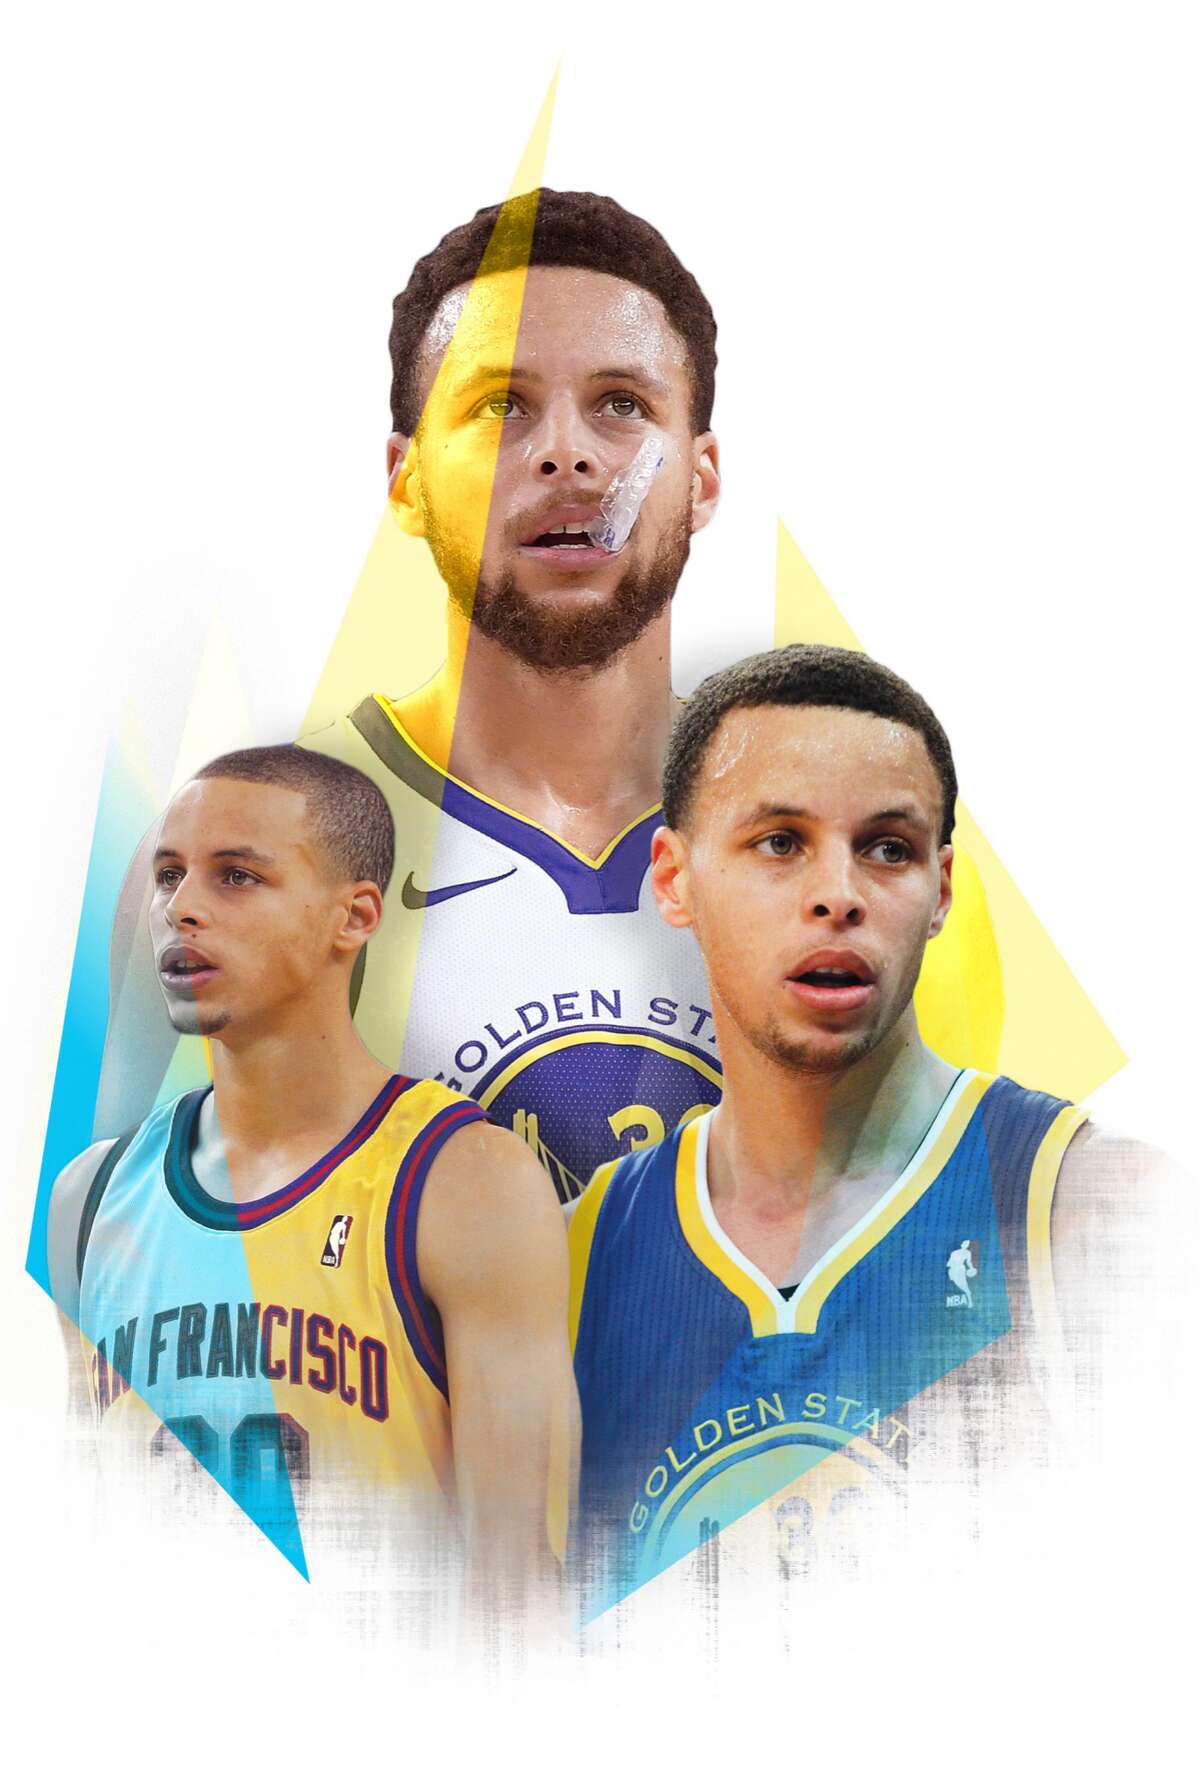 Curry is turning 30 after an extraordinary decade in which he blossomed from a slender, baby-faced prospect at Davidson College into the face of the NBA’s most high-profile franchise.